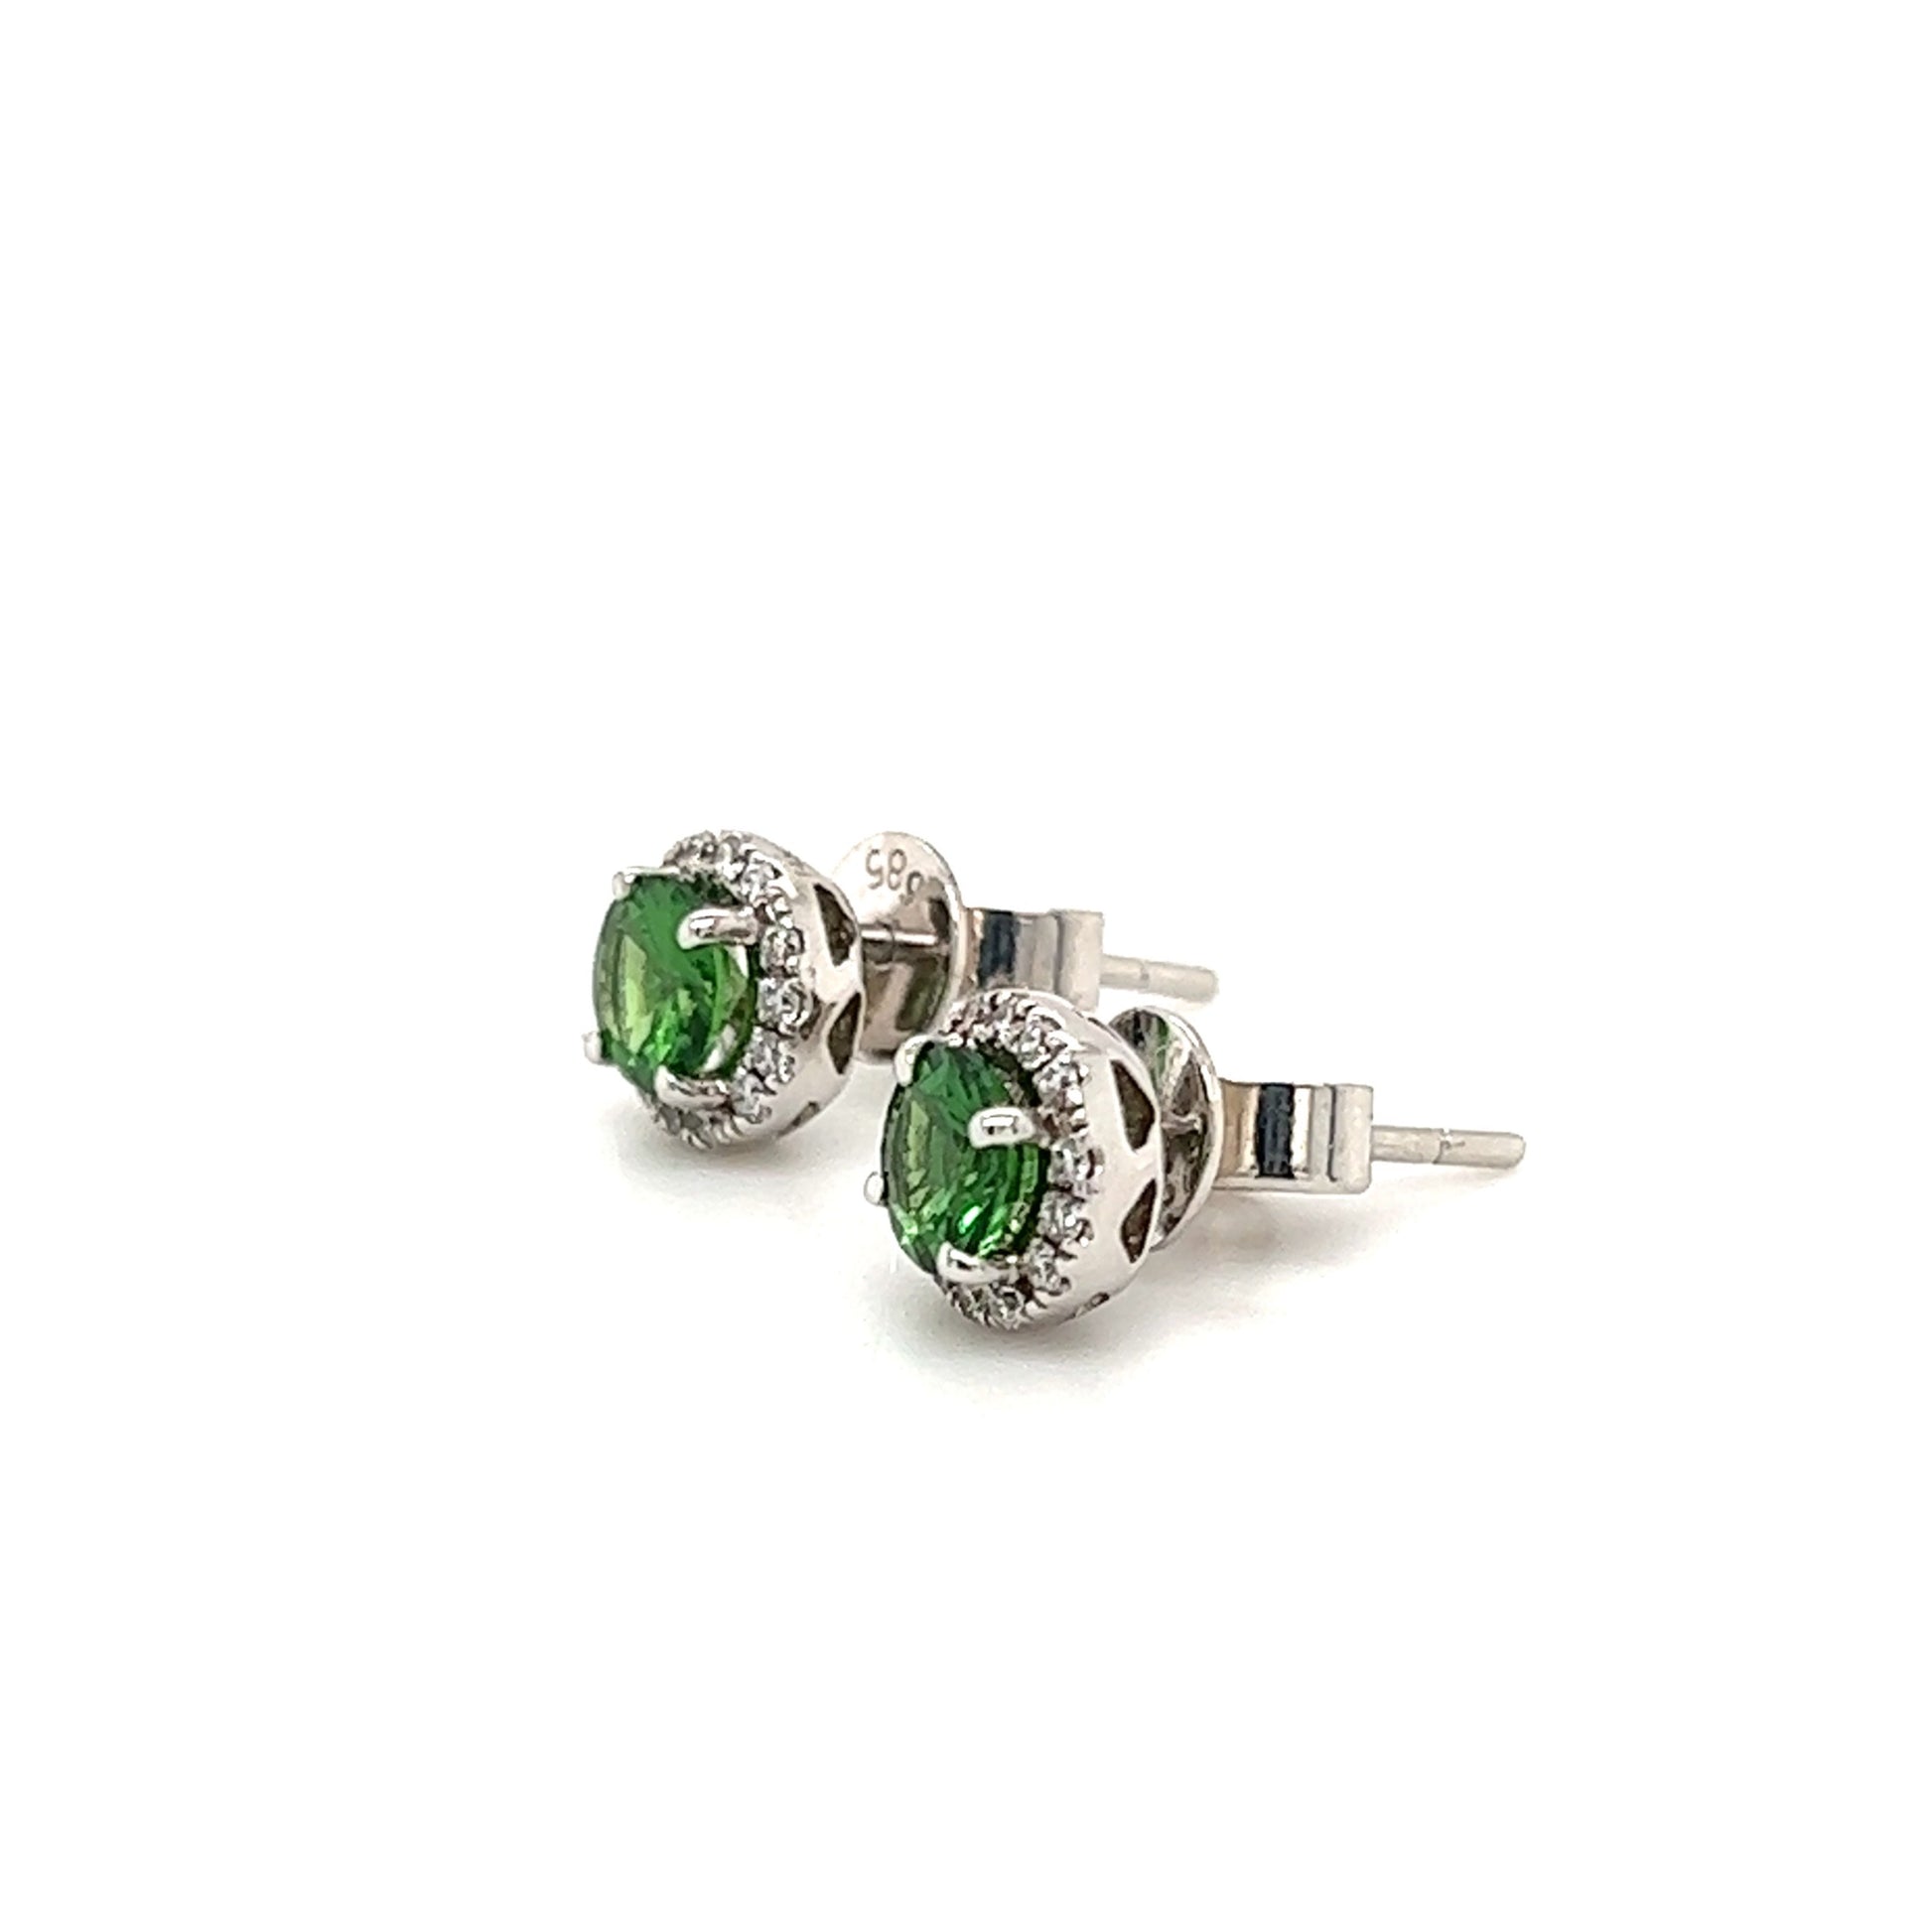 Round Tsavorite Stud Earrings with Diamonds Halo in 14K White Gold Right Side View